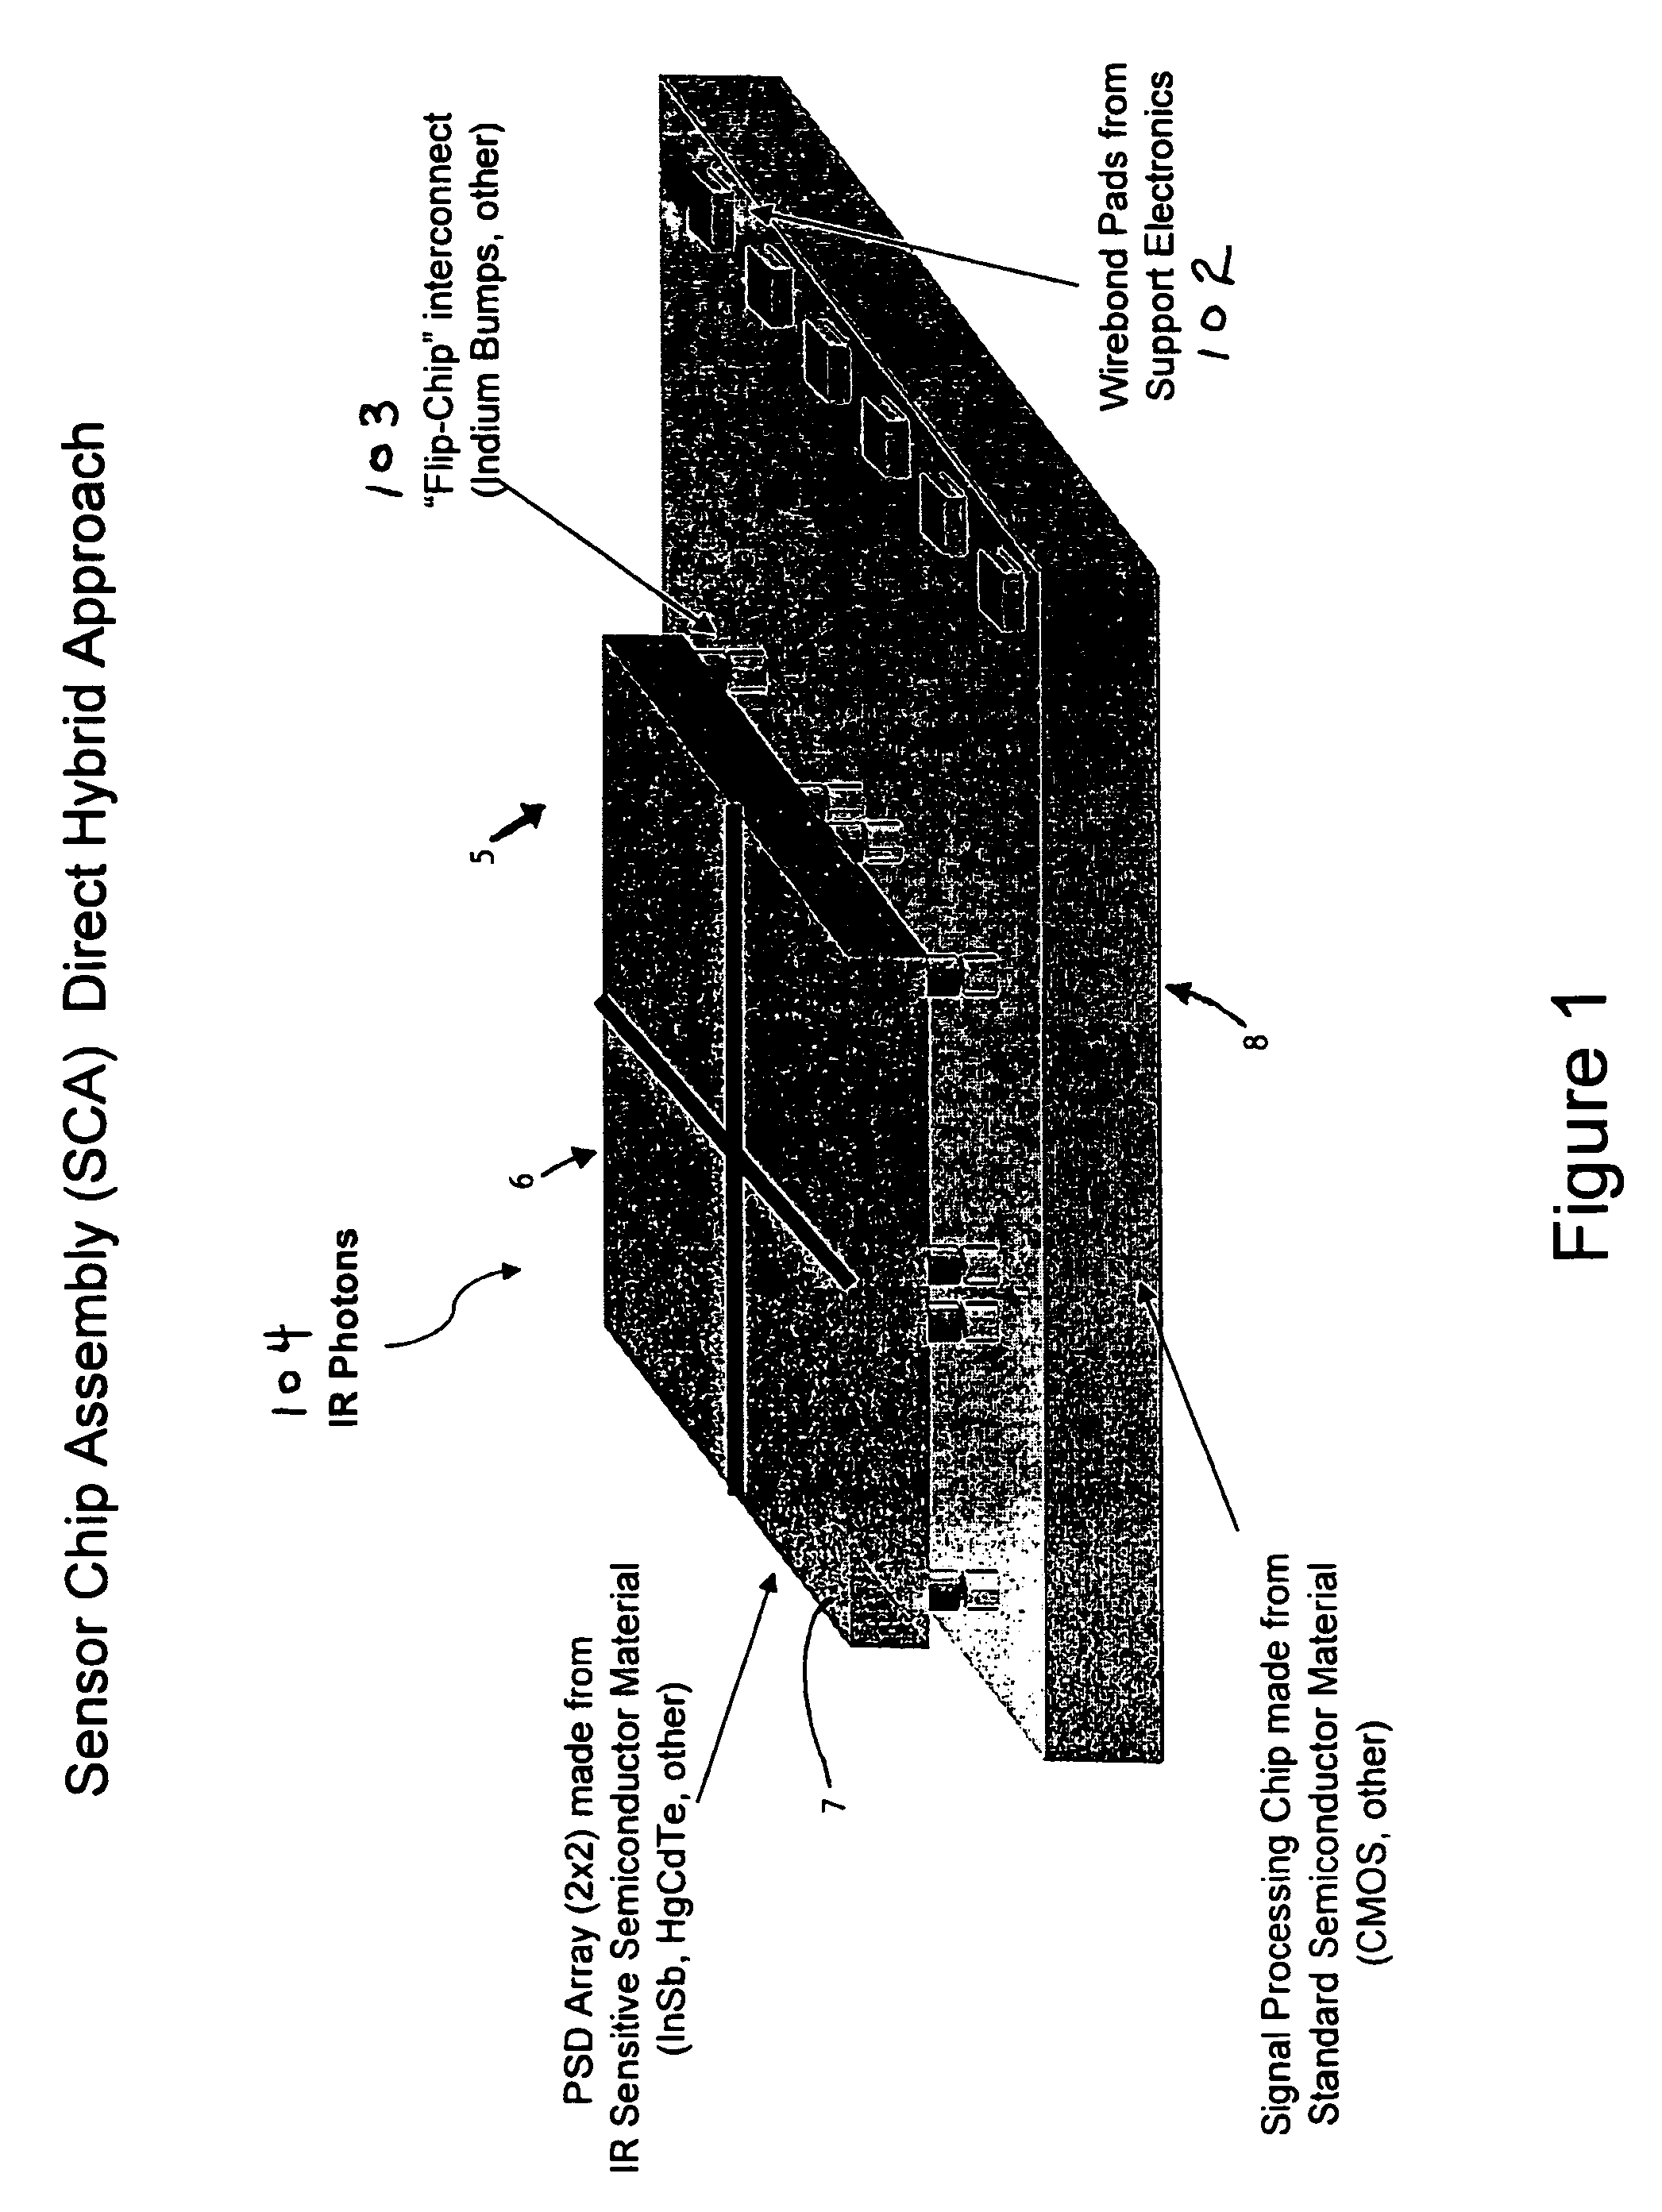 Methods for the use and manufacture of infrared position sensing detector focal plane arrays for optical tracking